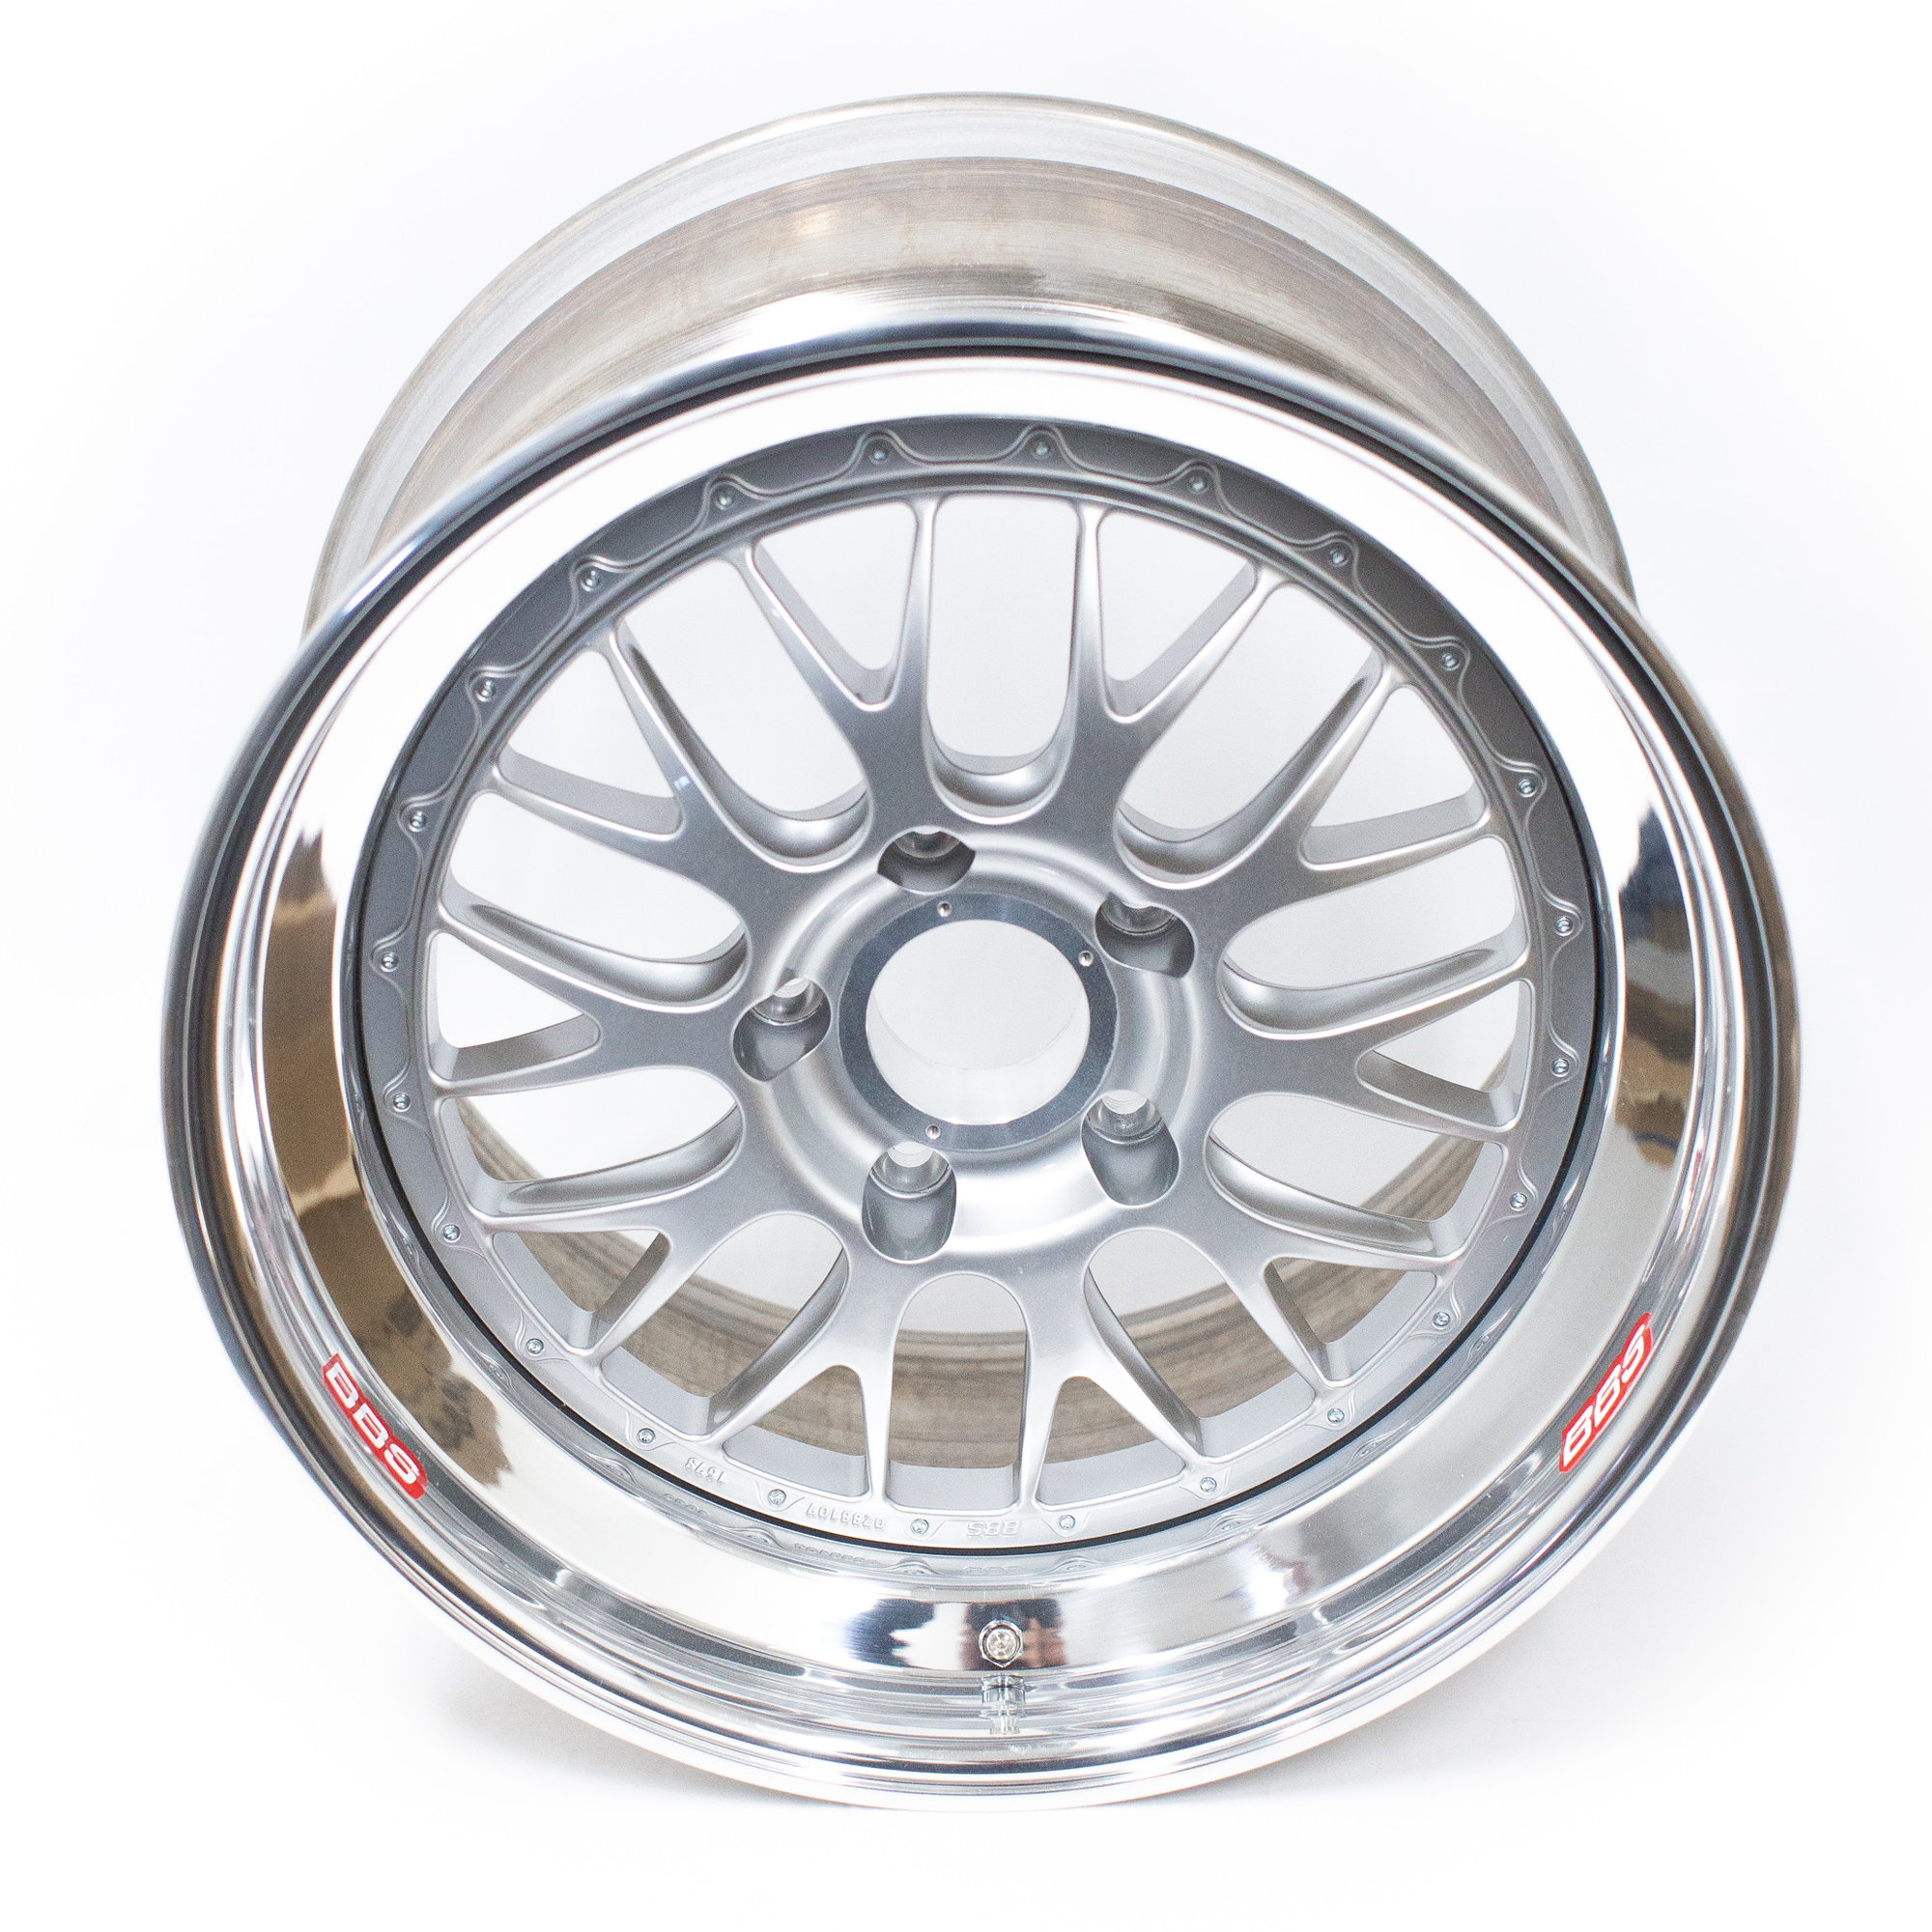 Wheels and Tires/Axles - BBS E88 + BBS Motorsport Wheel, Parts, Components - SYSTEM MOTORSPORTS - New - Hayward, CA 94545, United States